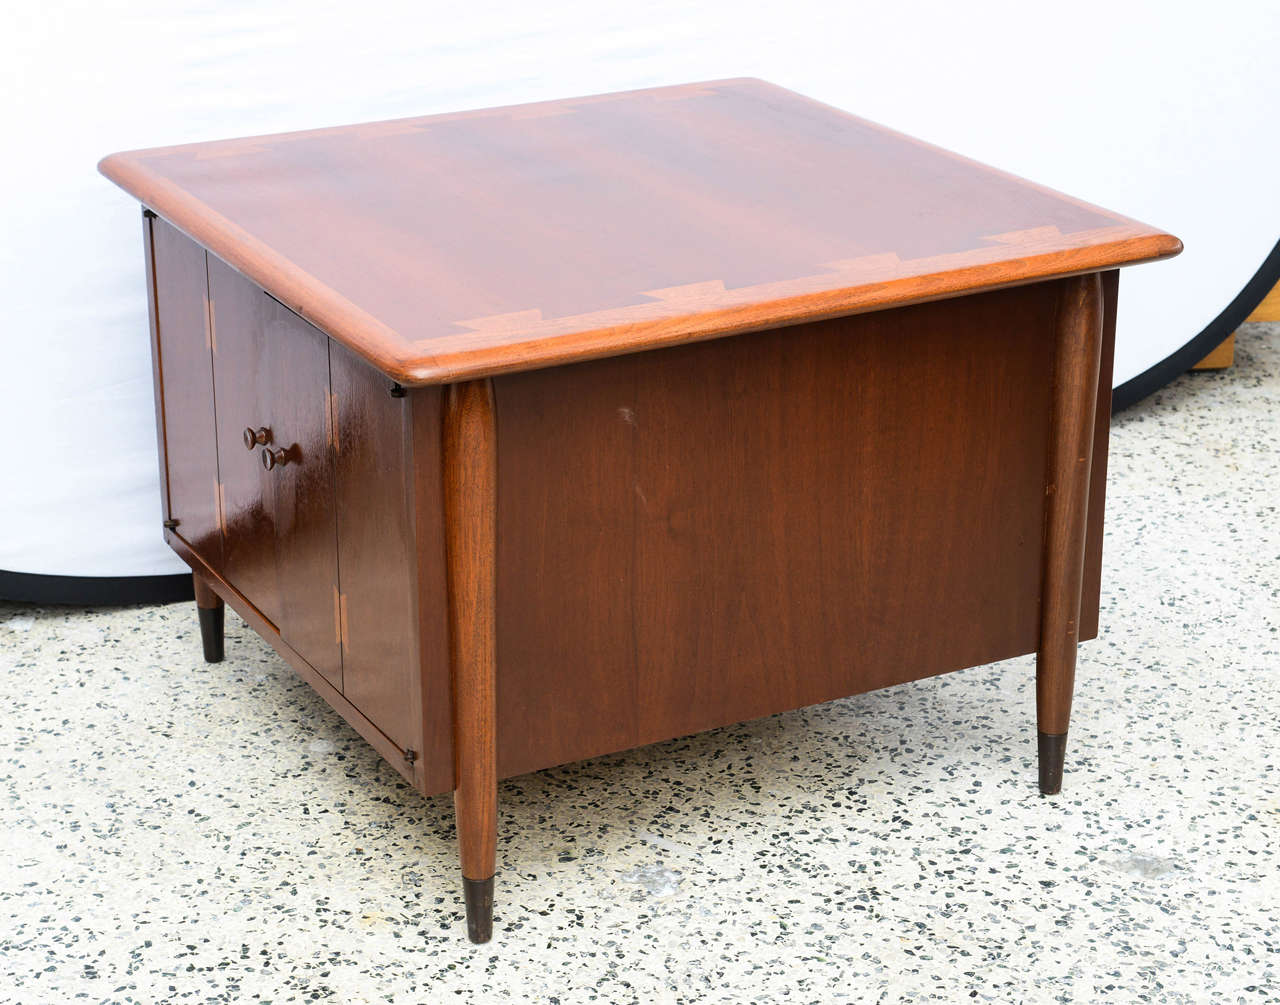 Mid-Century Modern Inlaid Lane End Tables with Double Doors from Acclaim Series, USA 1960s